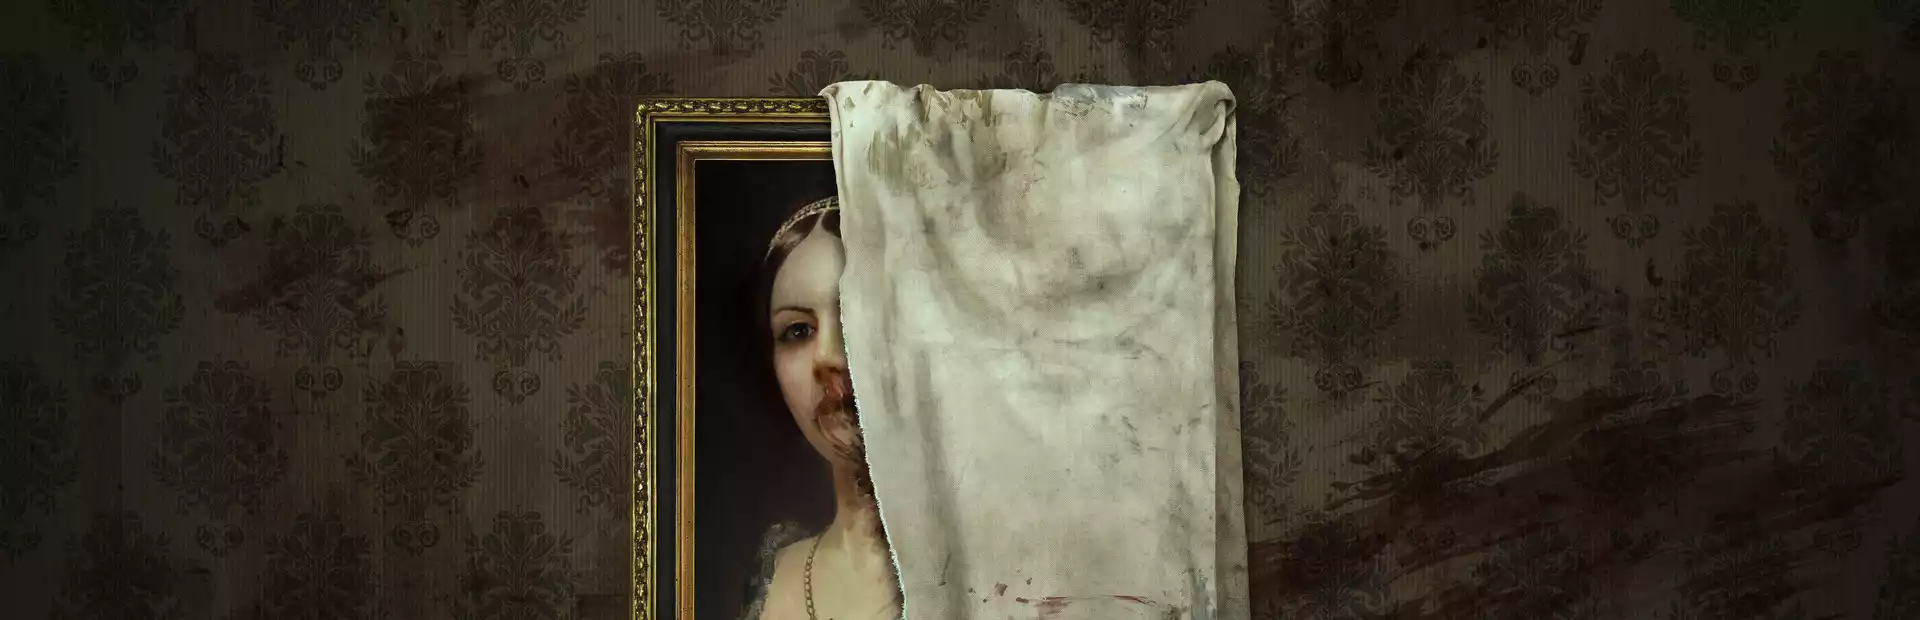 Layers of Fear Masterpiece Edition Steam Key GLOBAL